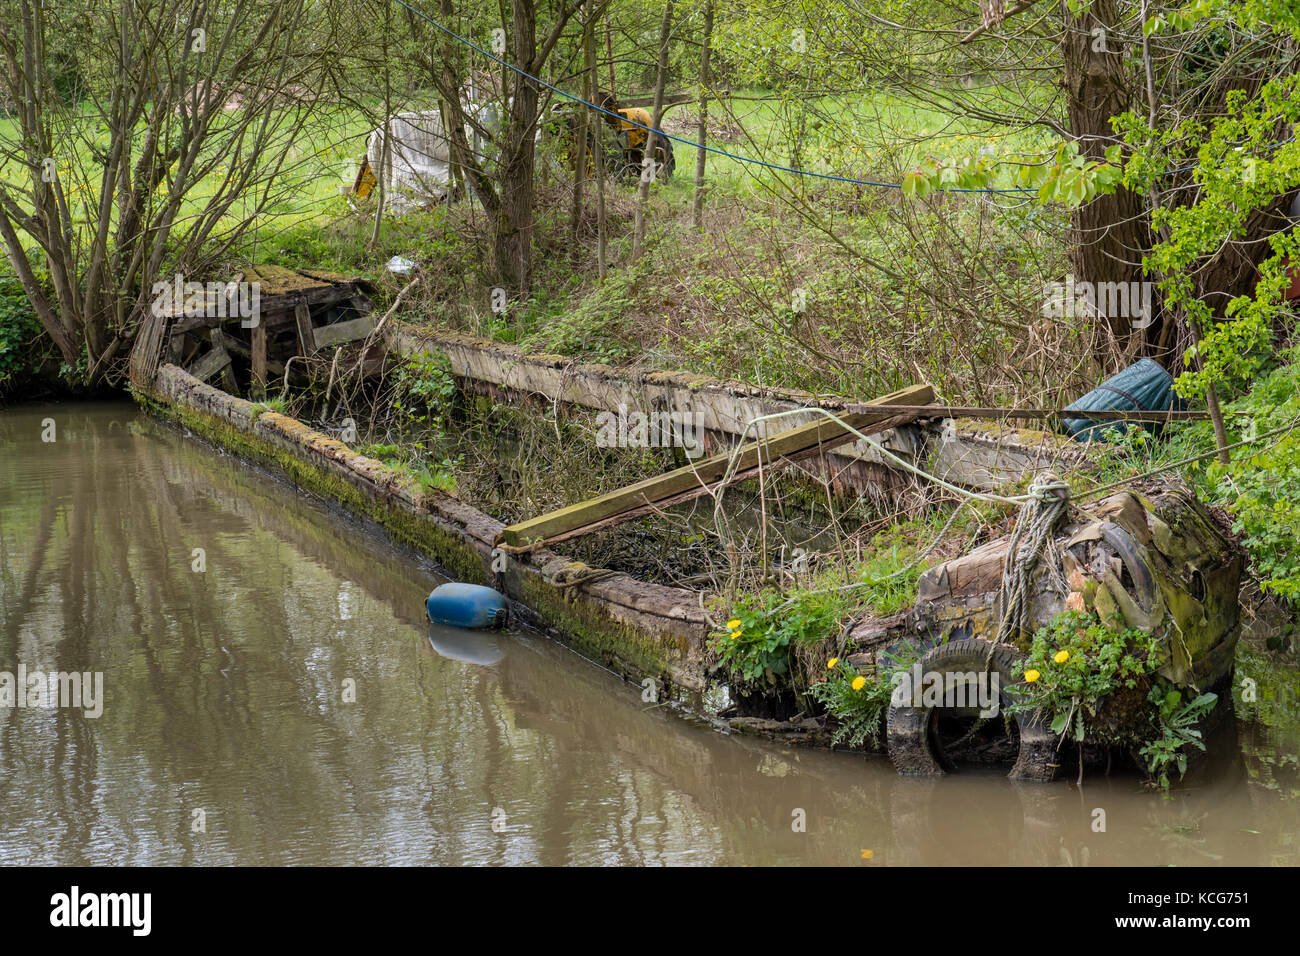 Old wooden hulled canal boat Oxford Canal Oxfordshire England Stock Photo